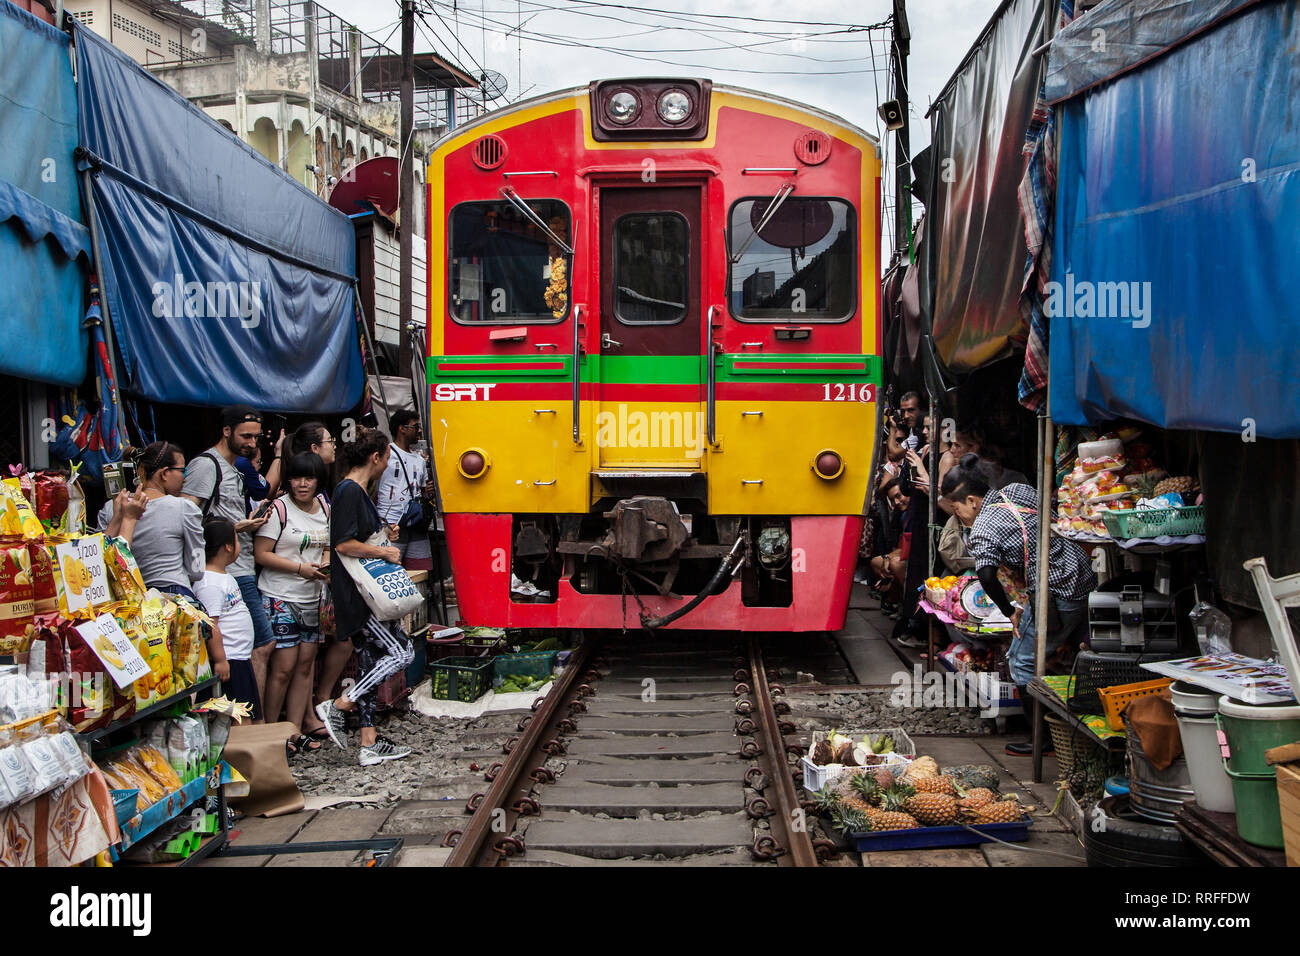 Maeklong, Thailand - August 29, 2018: Train passing through the Railway Market in Maeklong, Samut Songkhram, Thailand. This market is one of the most  Stock Photo